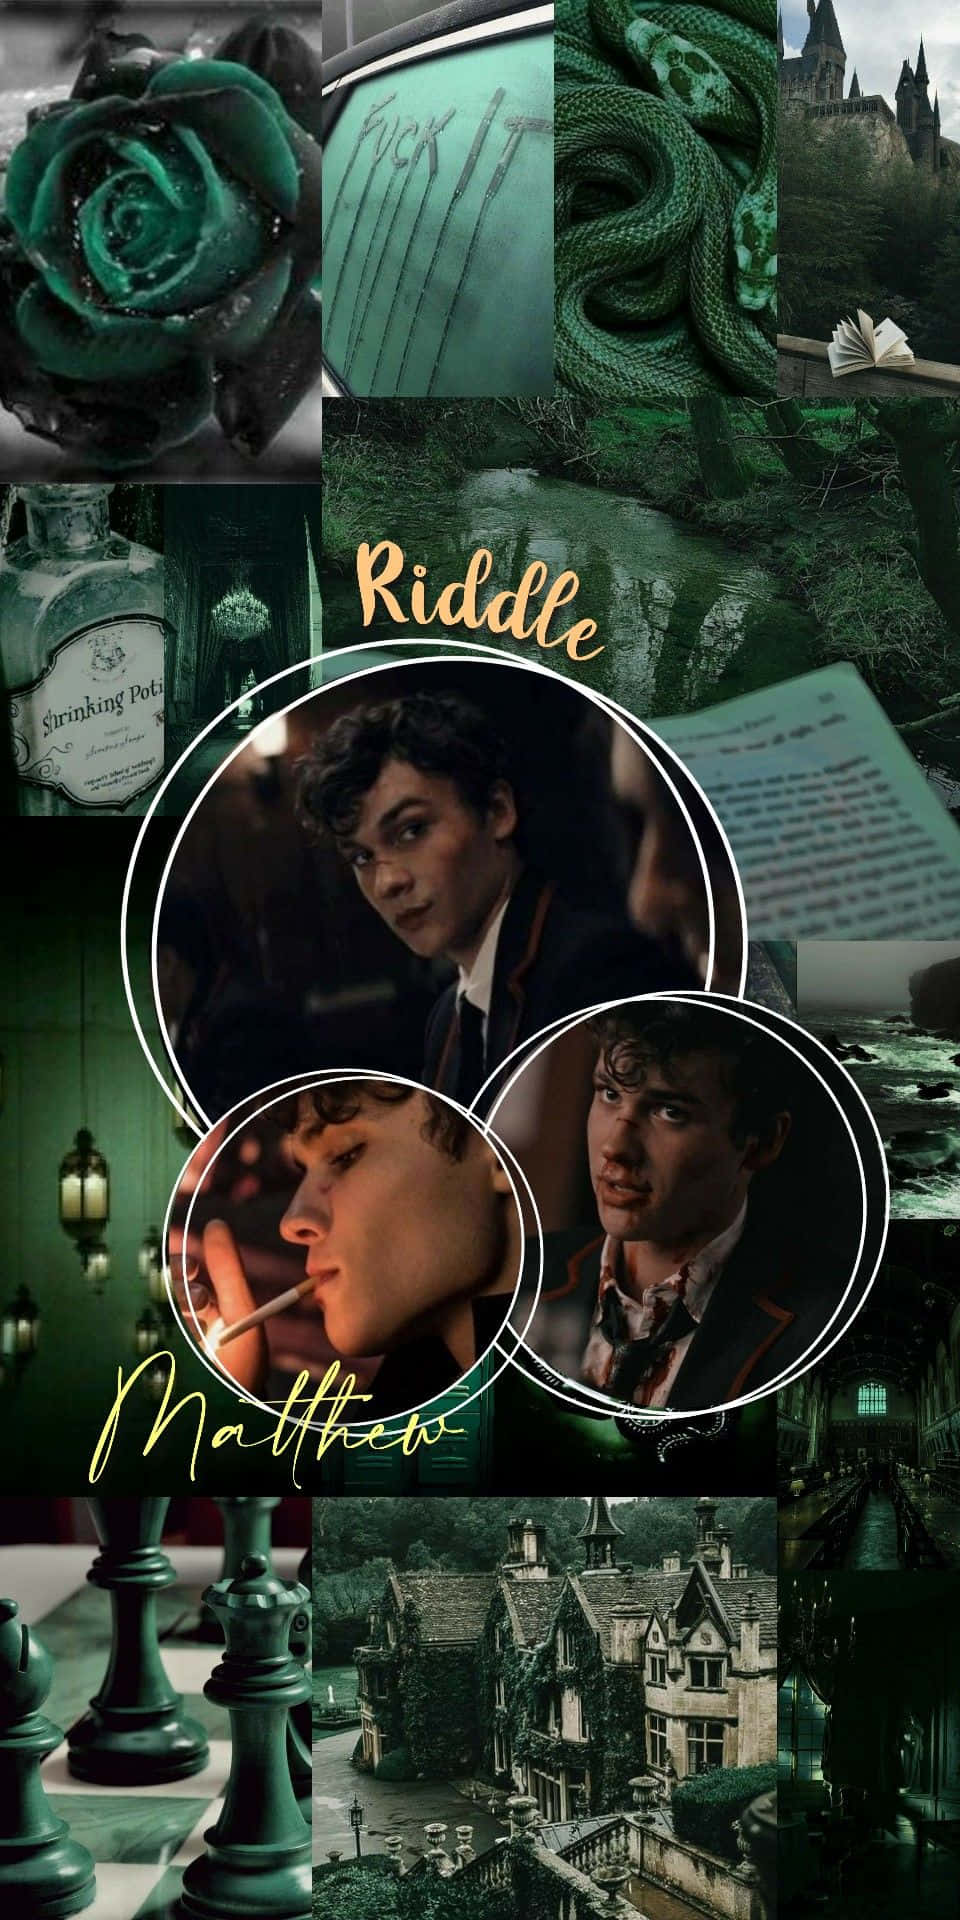 Mysterious Mattheo Riddle Collage Wallpaper